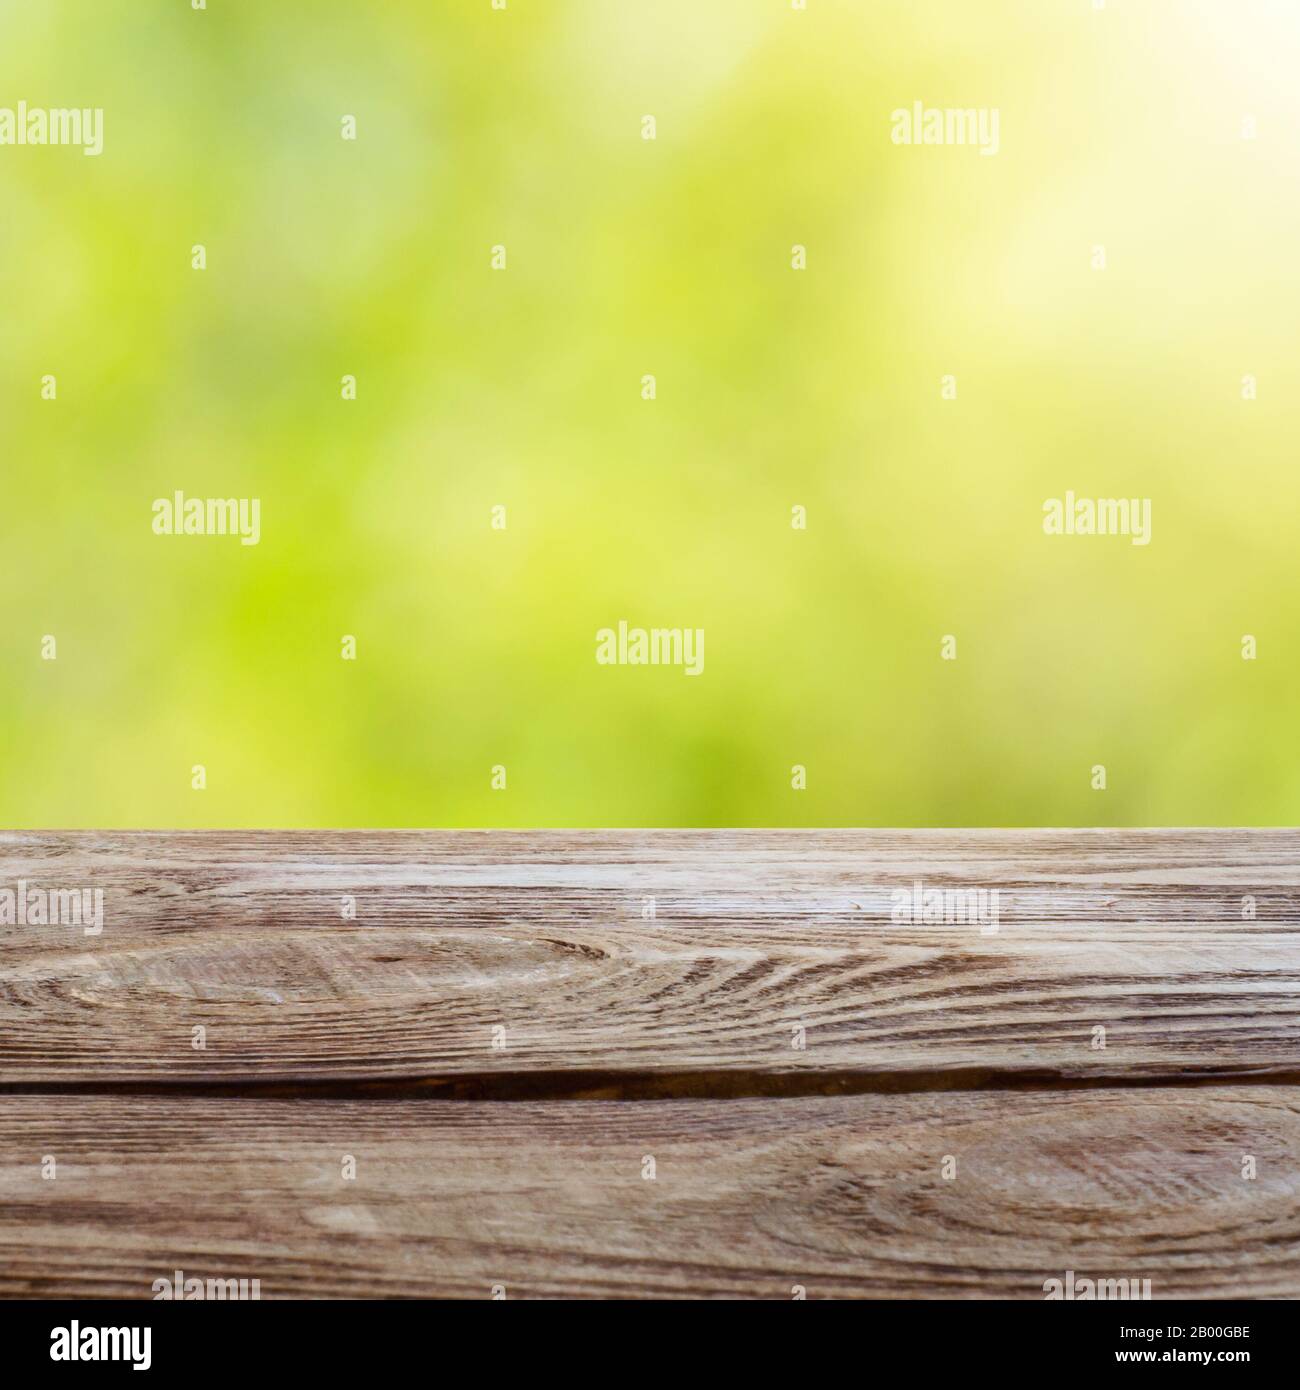 Perspective Wood Table Top Blurry High Resolution Stock Photography And Images Alamy